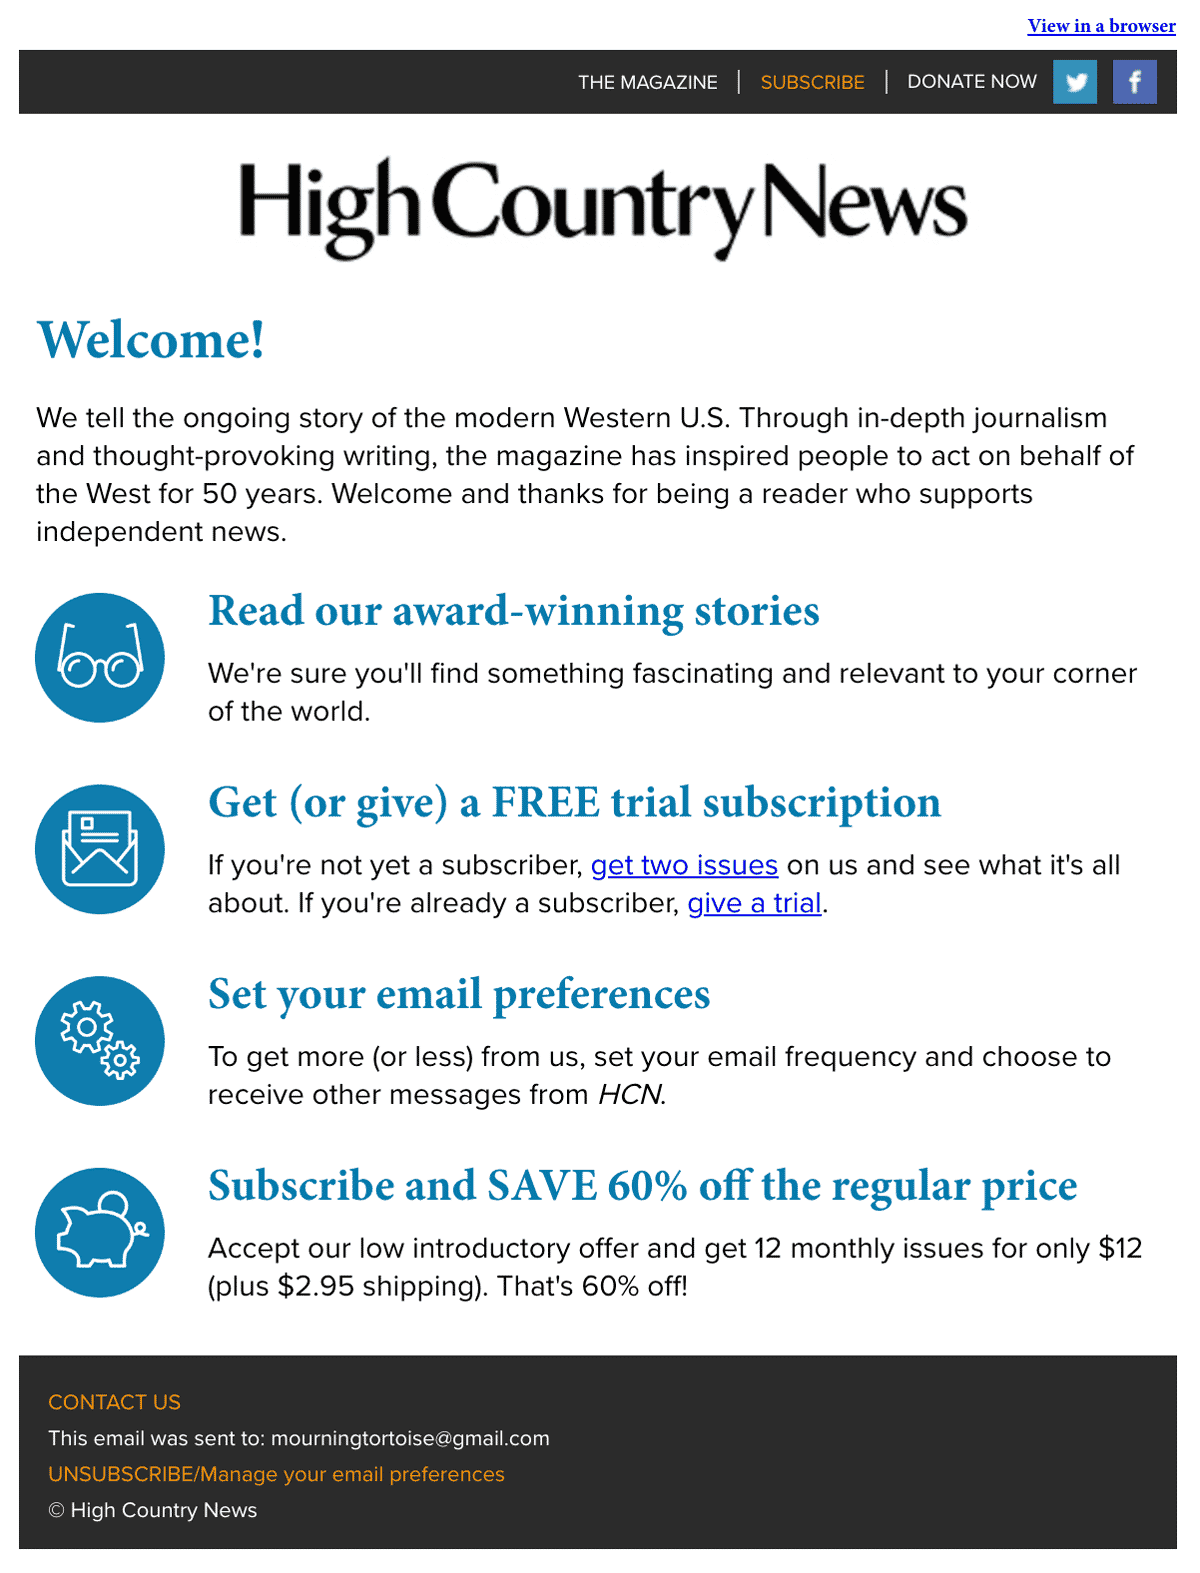 High Country News Welcome Email 2022